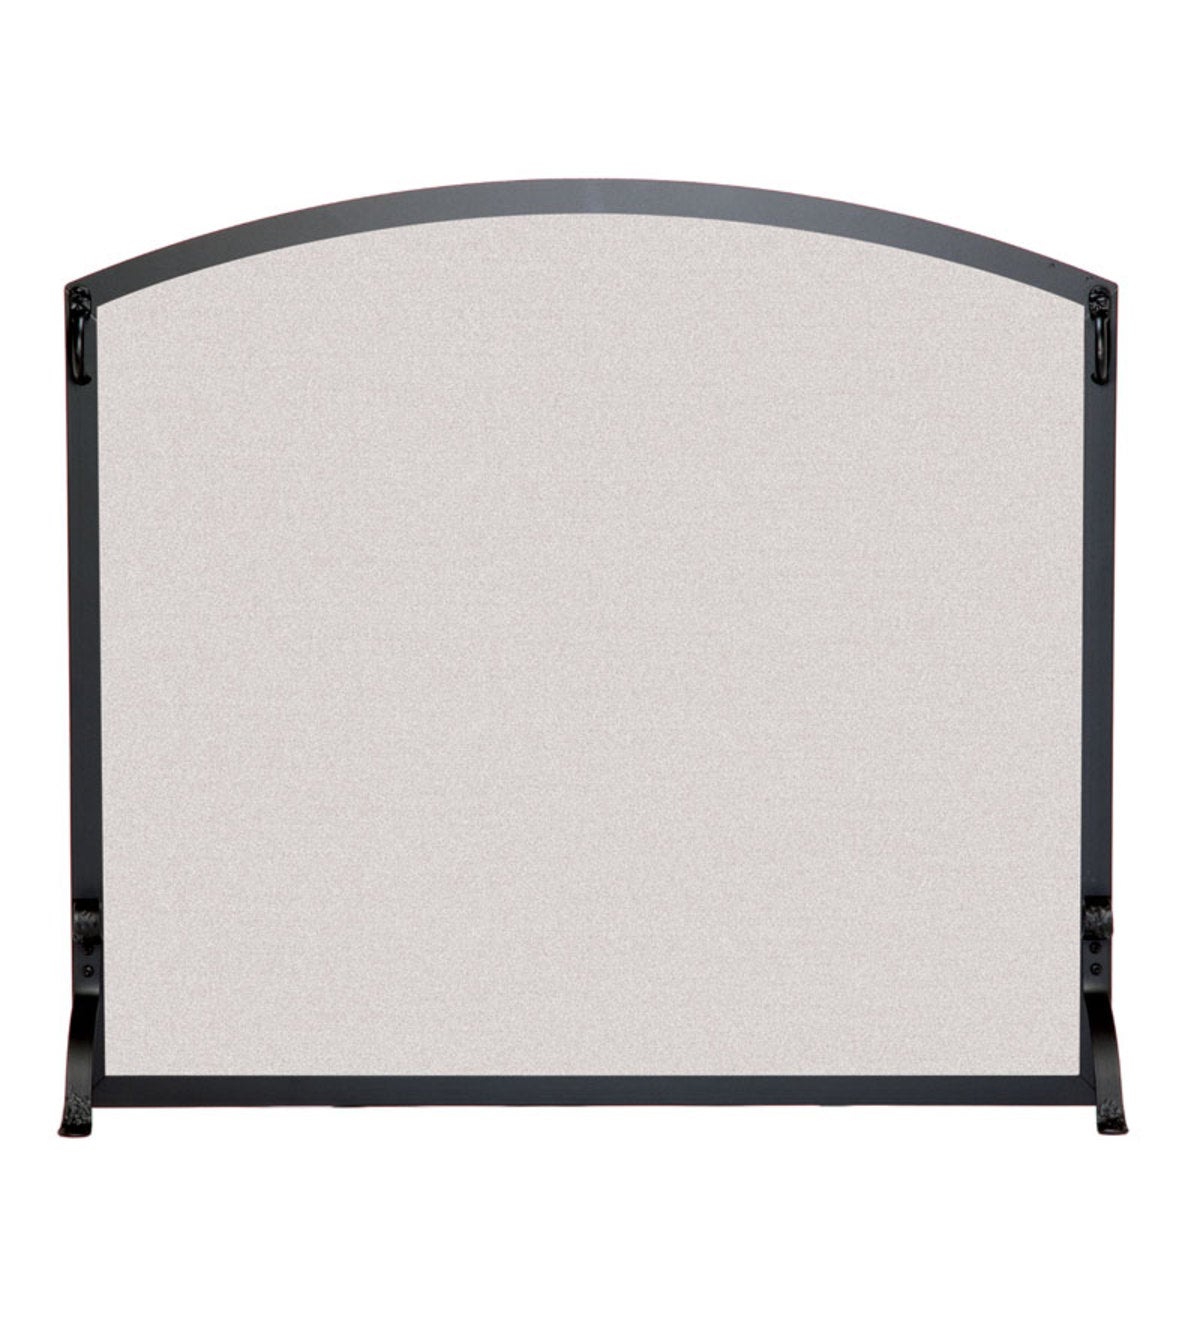 Large Flat Fireplace Screen With Arched Top